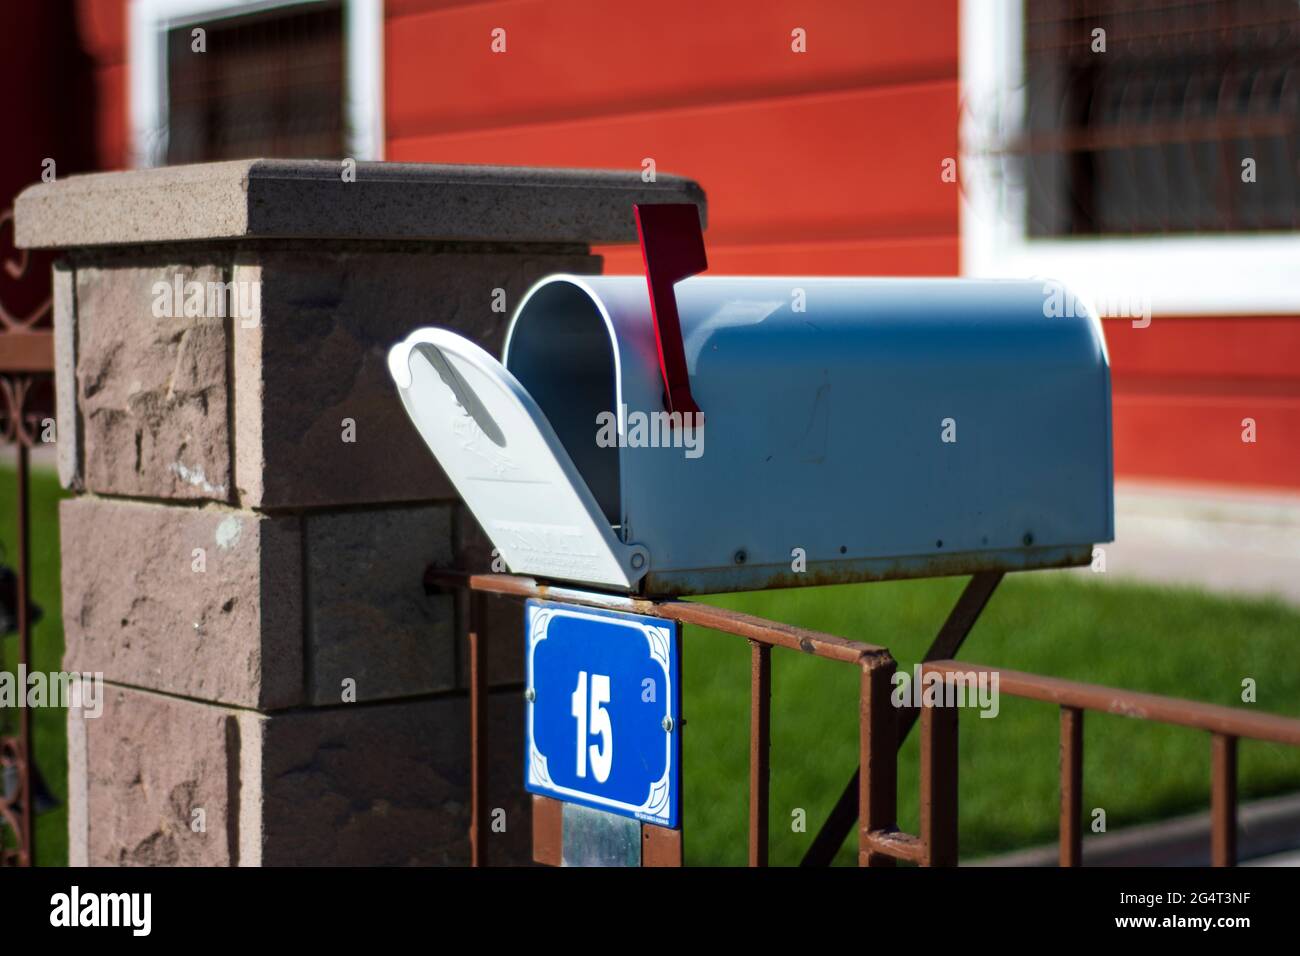 Just in front of the garden gate is an old-style mailbox with an open lid. Selective Focus Mail Box Stock Photo